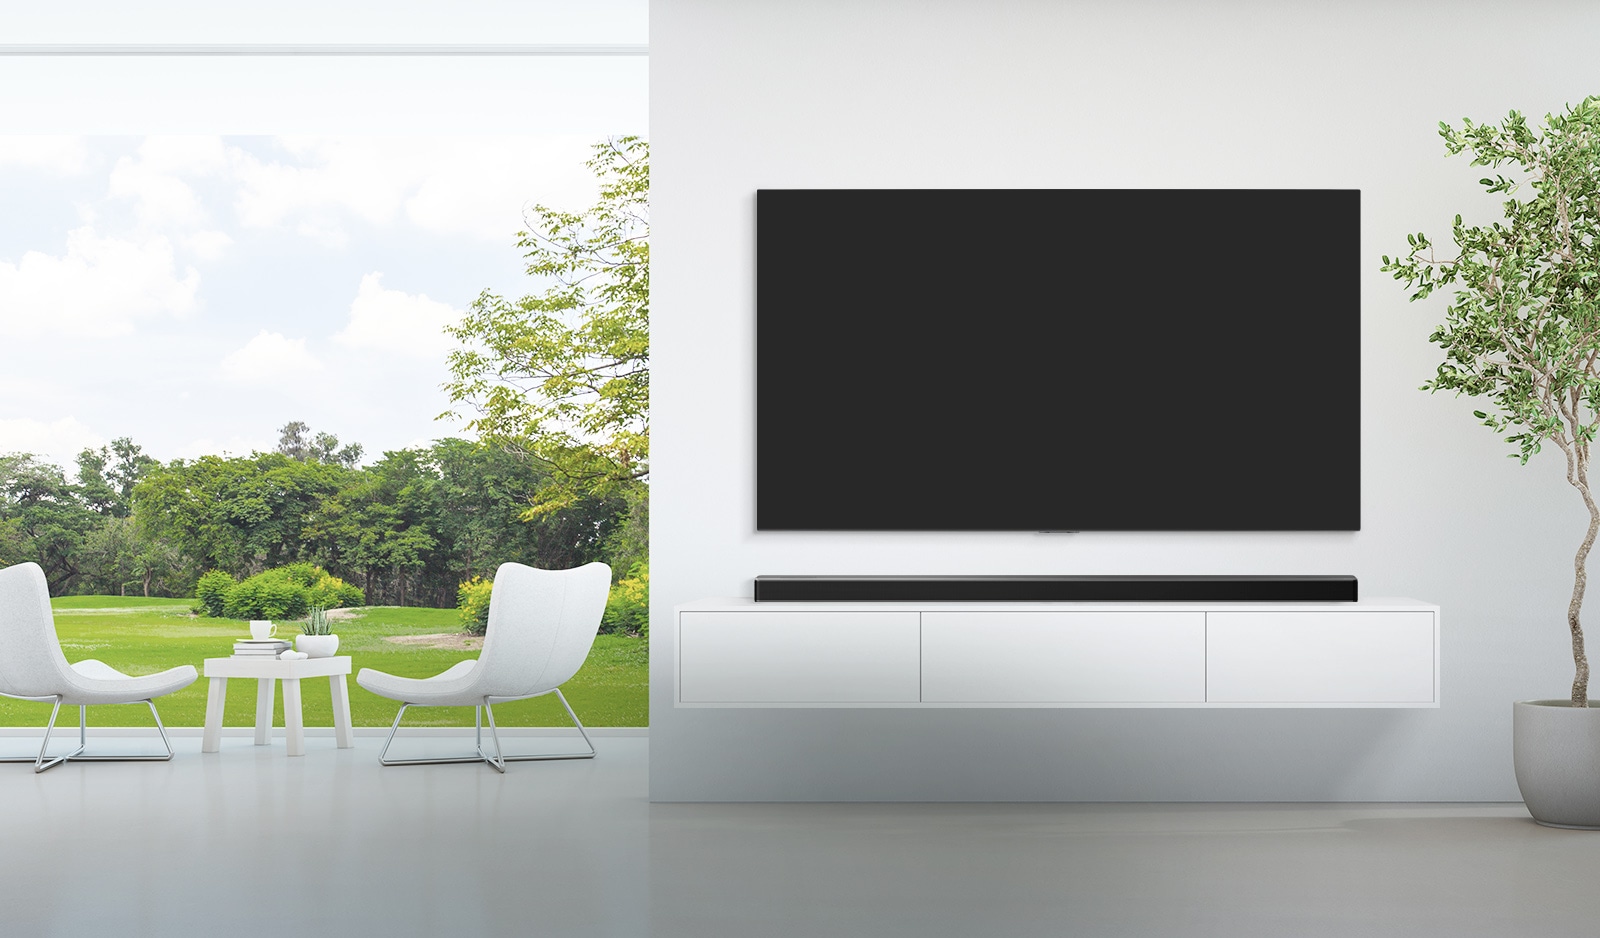 LG Sound Bars - Designed with the Environment in Mind